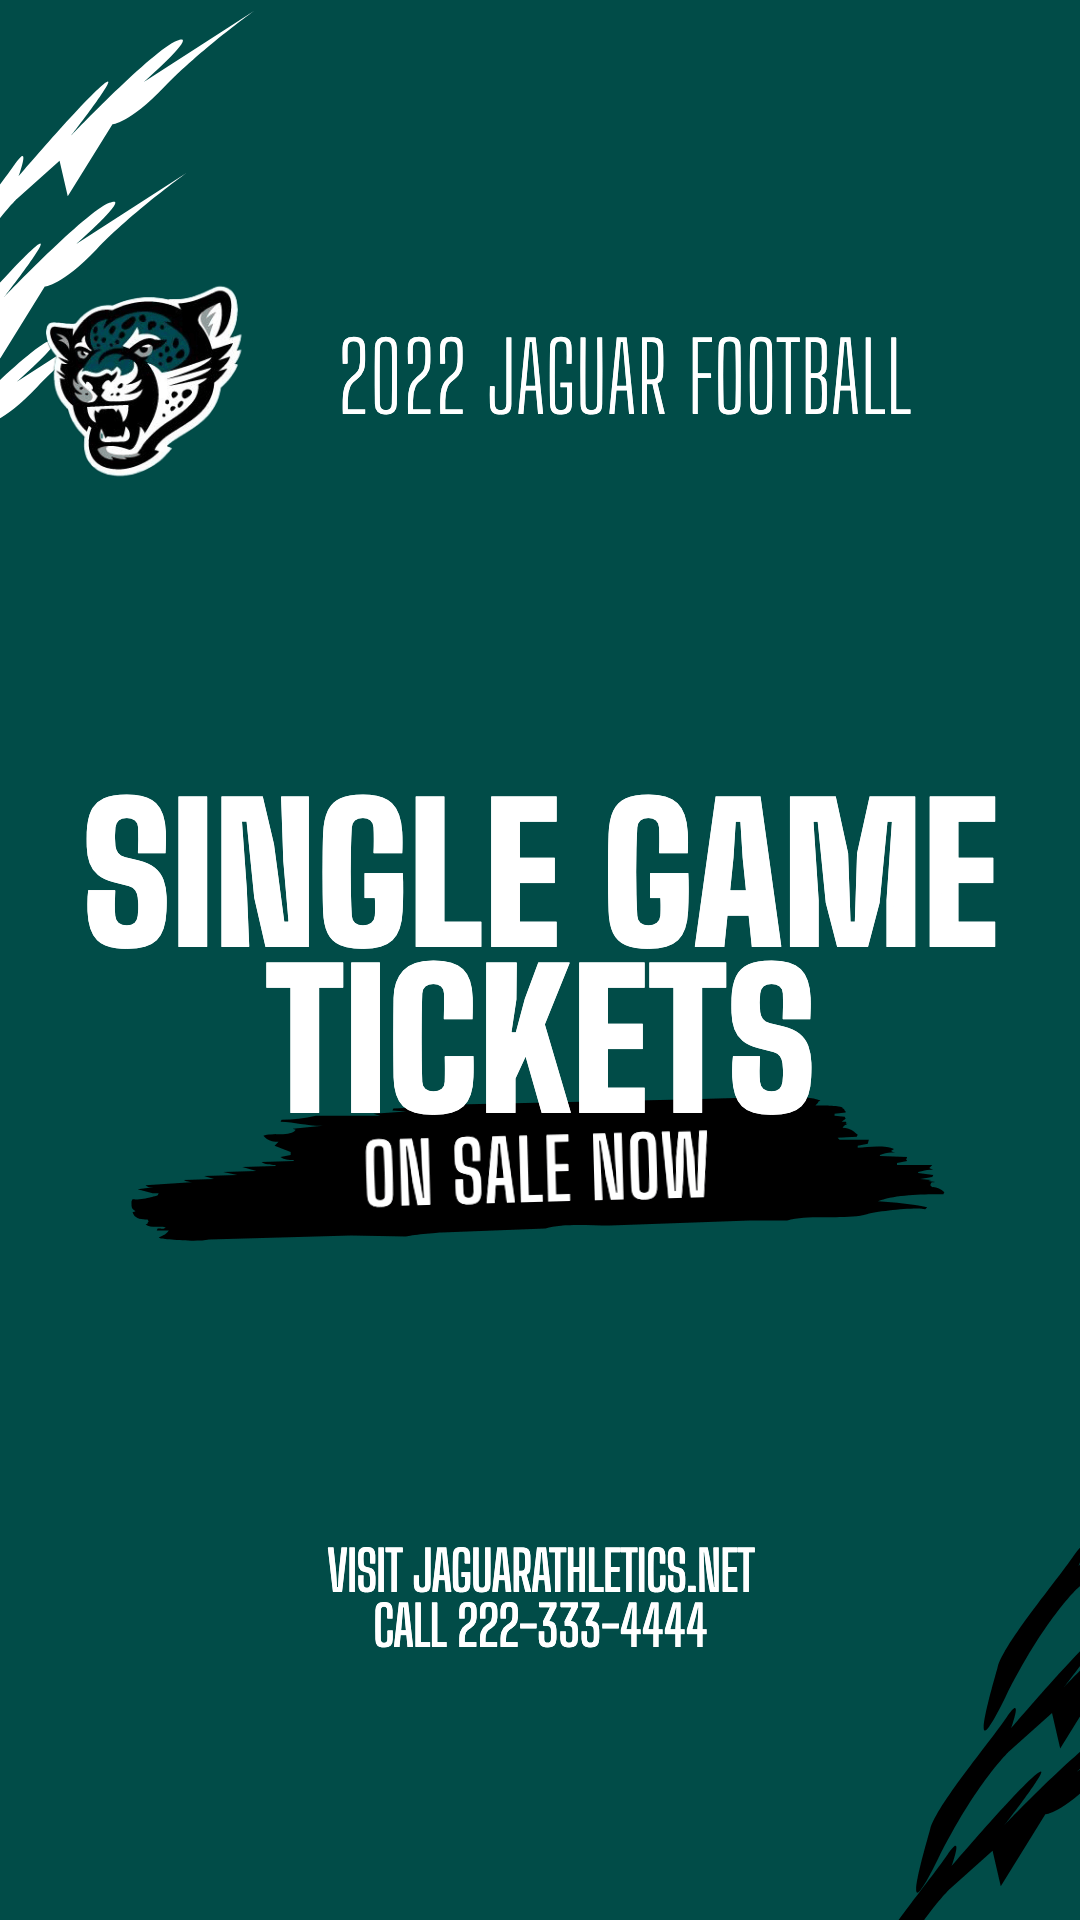 Single Game Tickets On Sale Graphic